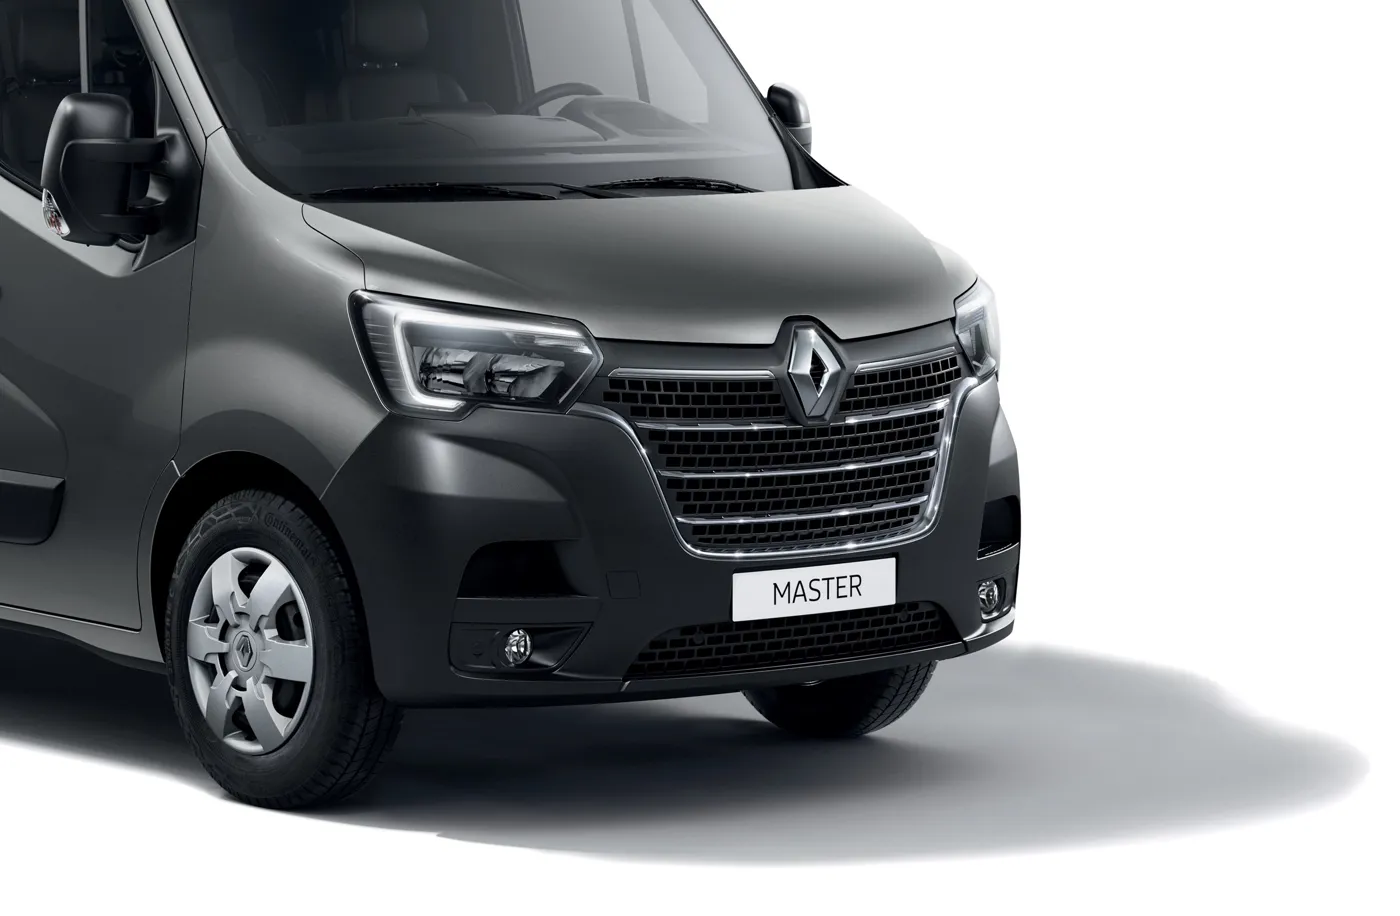 Renault reveals specifications for new Trafic and Master